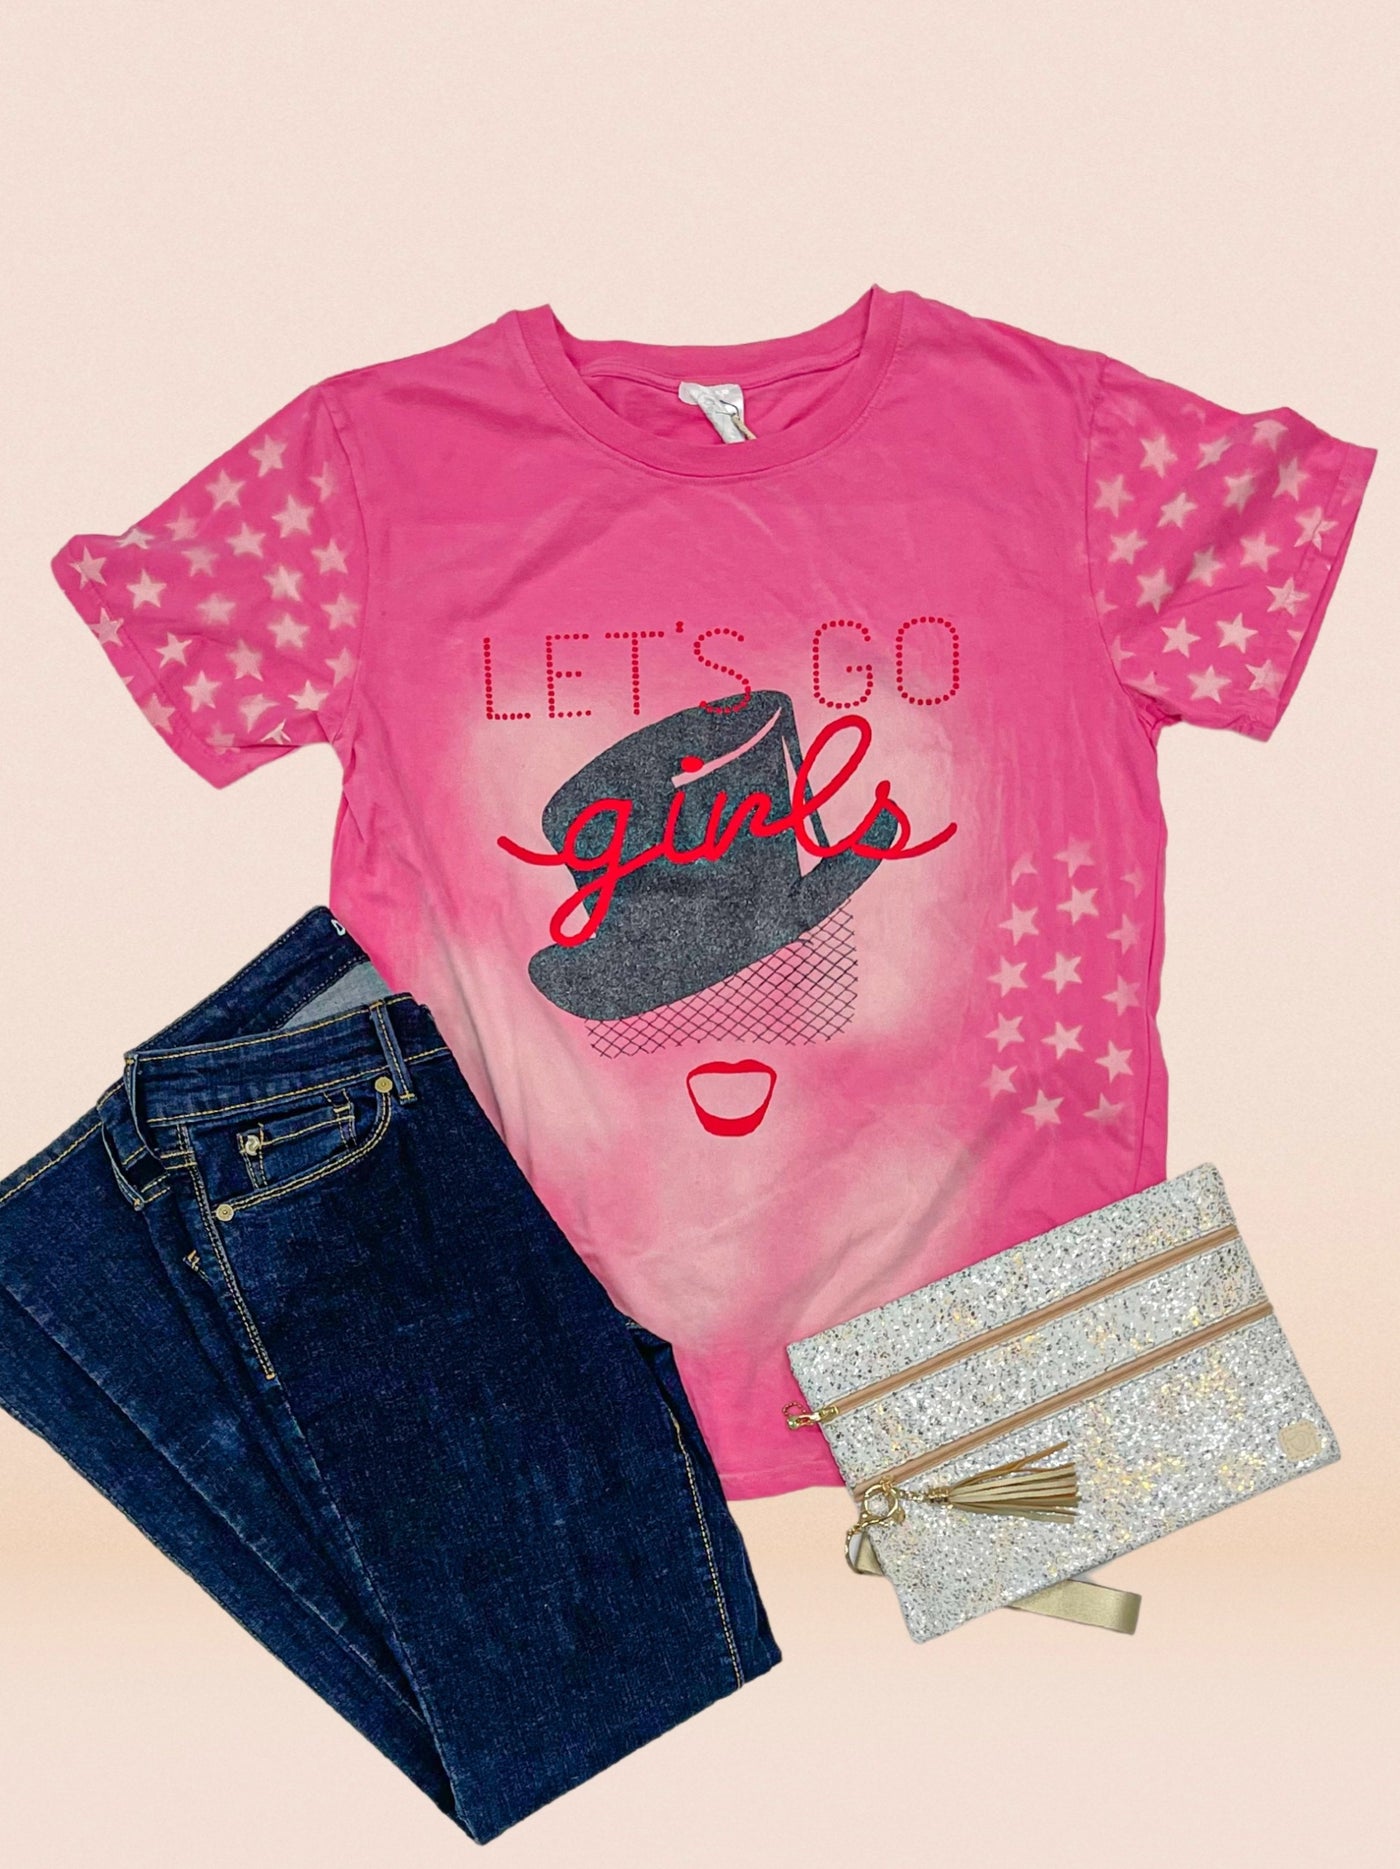 Let's Go Girls on Pink oxide star tee